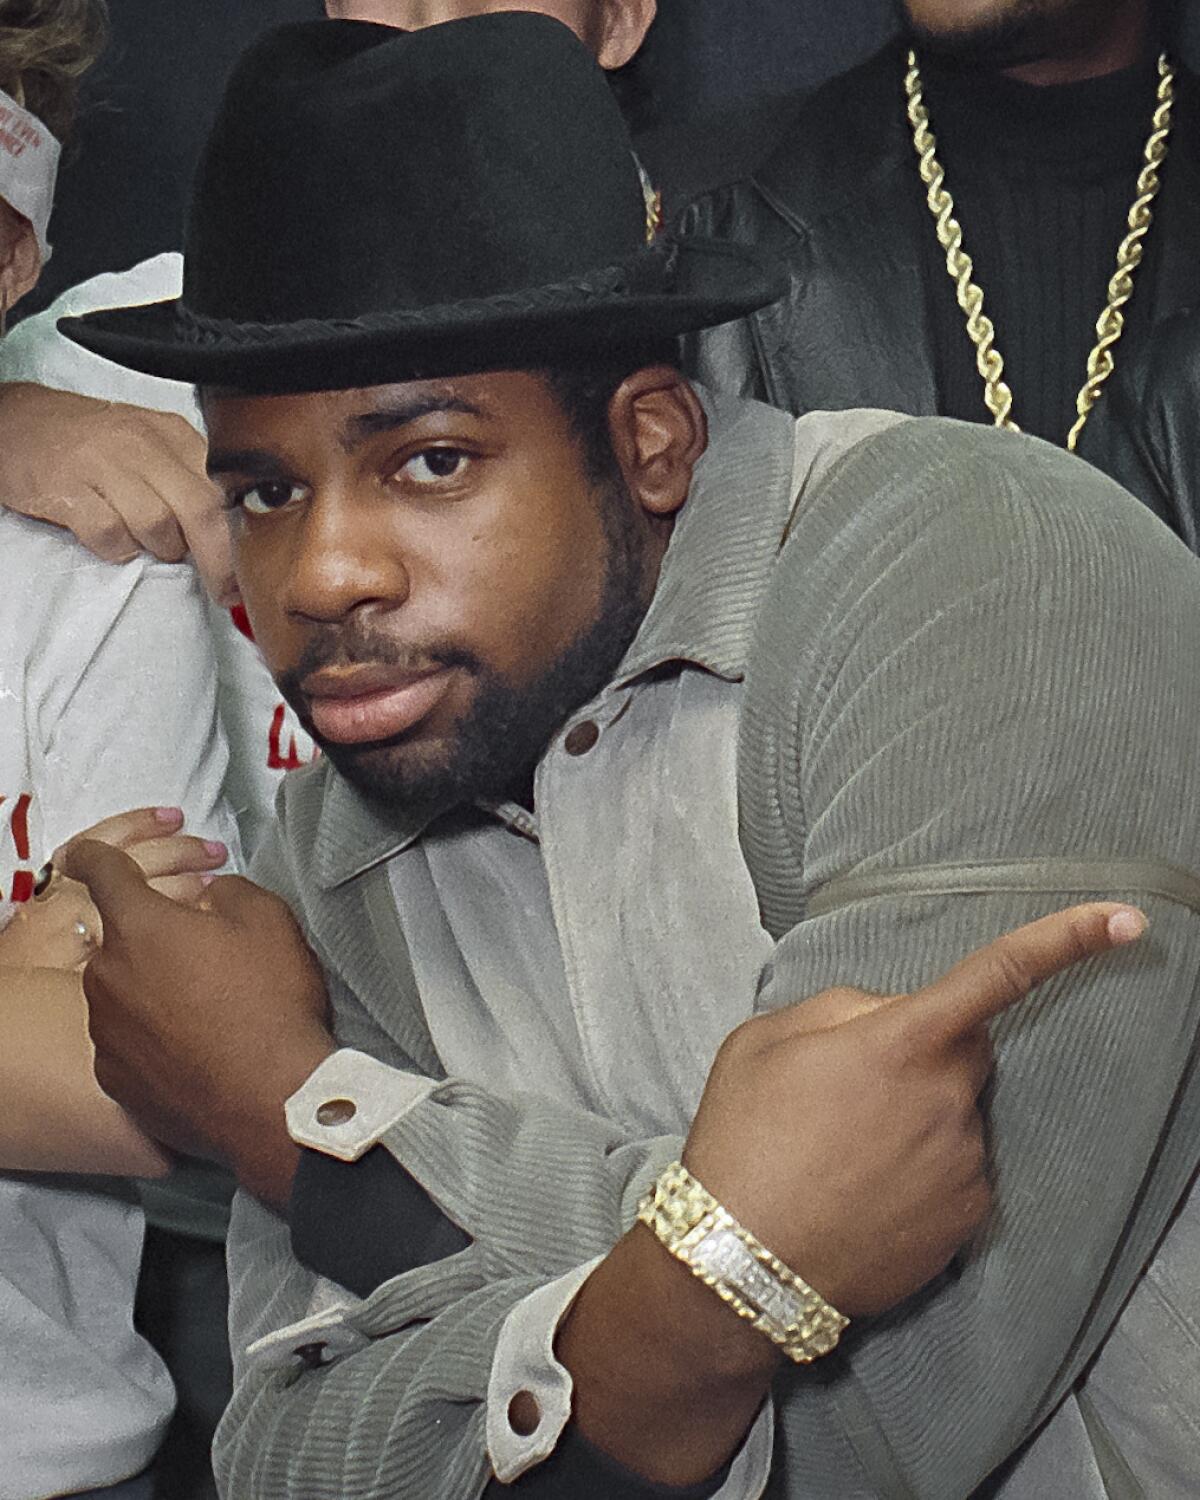 Run-DMC's Jam Master Jay wears a black hat, crosses his arms in an X and points his index fingers